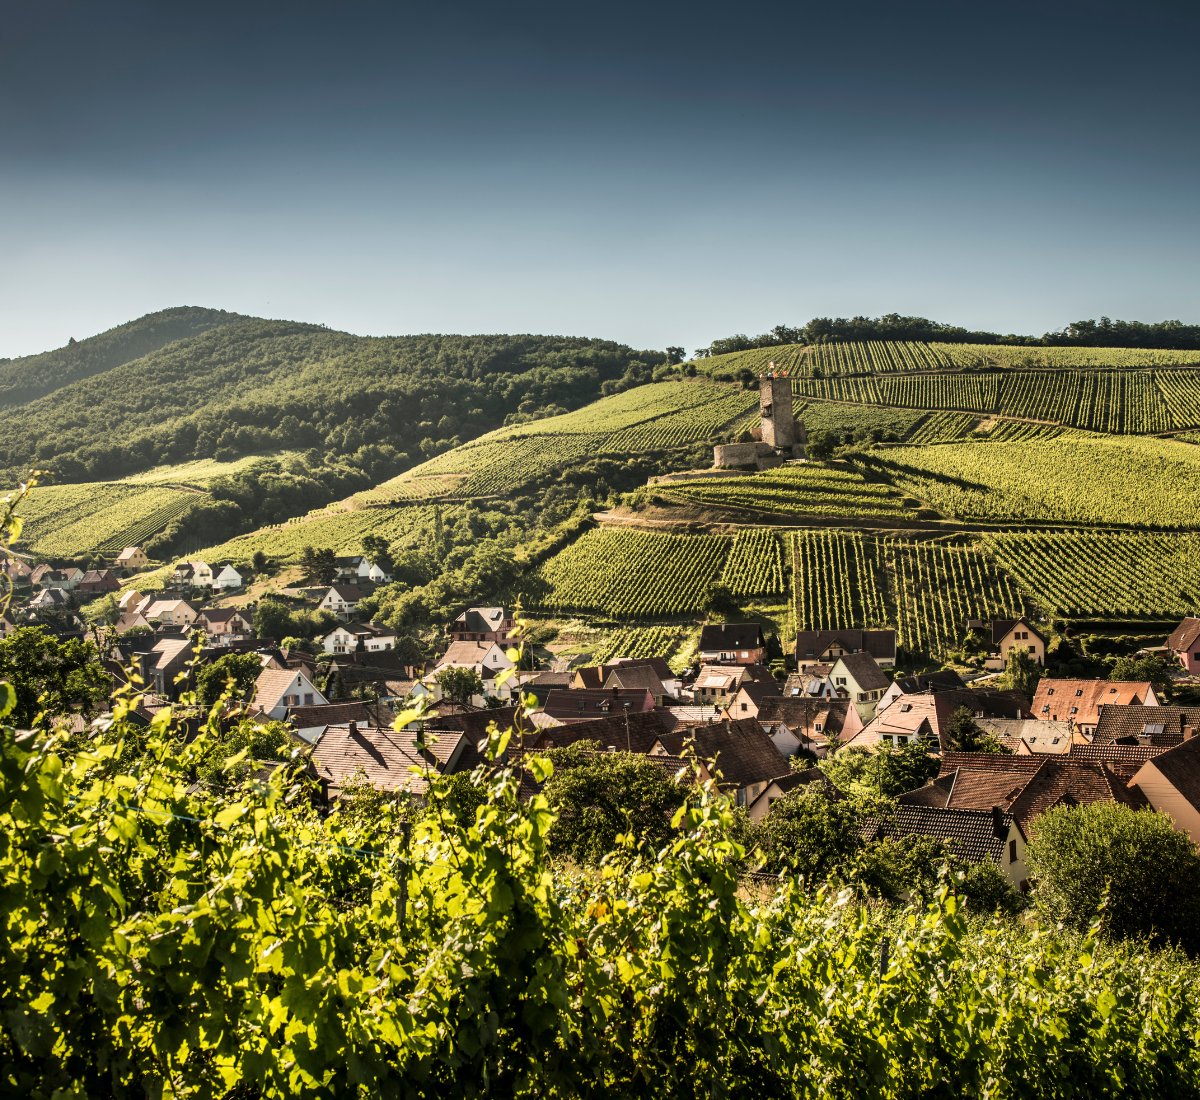 Domaine Meyer Fonne - mailchi.mp/de-burgh/domai… ALSACE Delicious wines from the region that has one of the greatest examples of terroir. Its soil diversity means that several grape varieties can flourish here making it one of the most varied grape growing regions in the world.